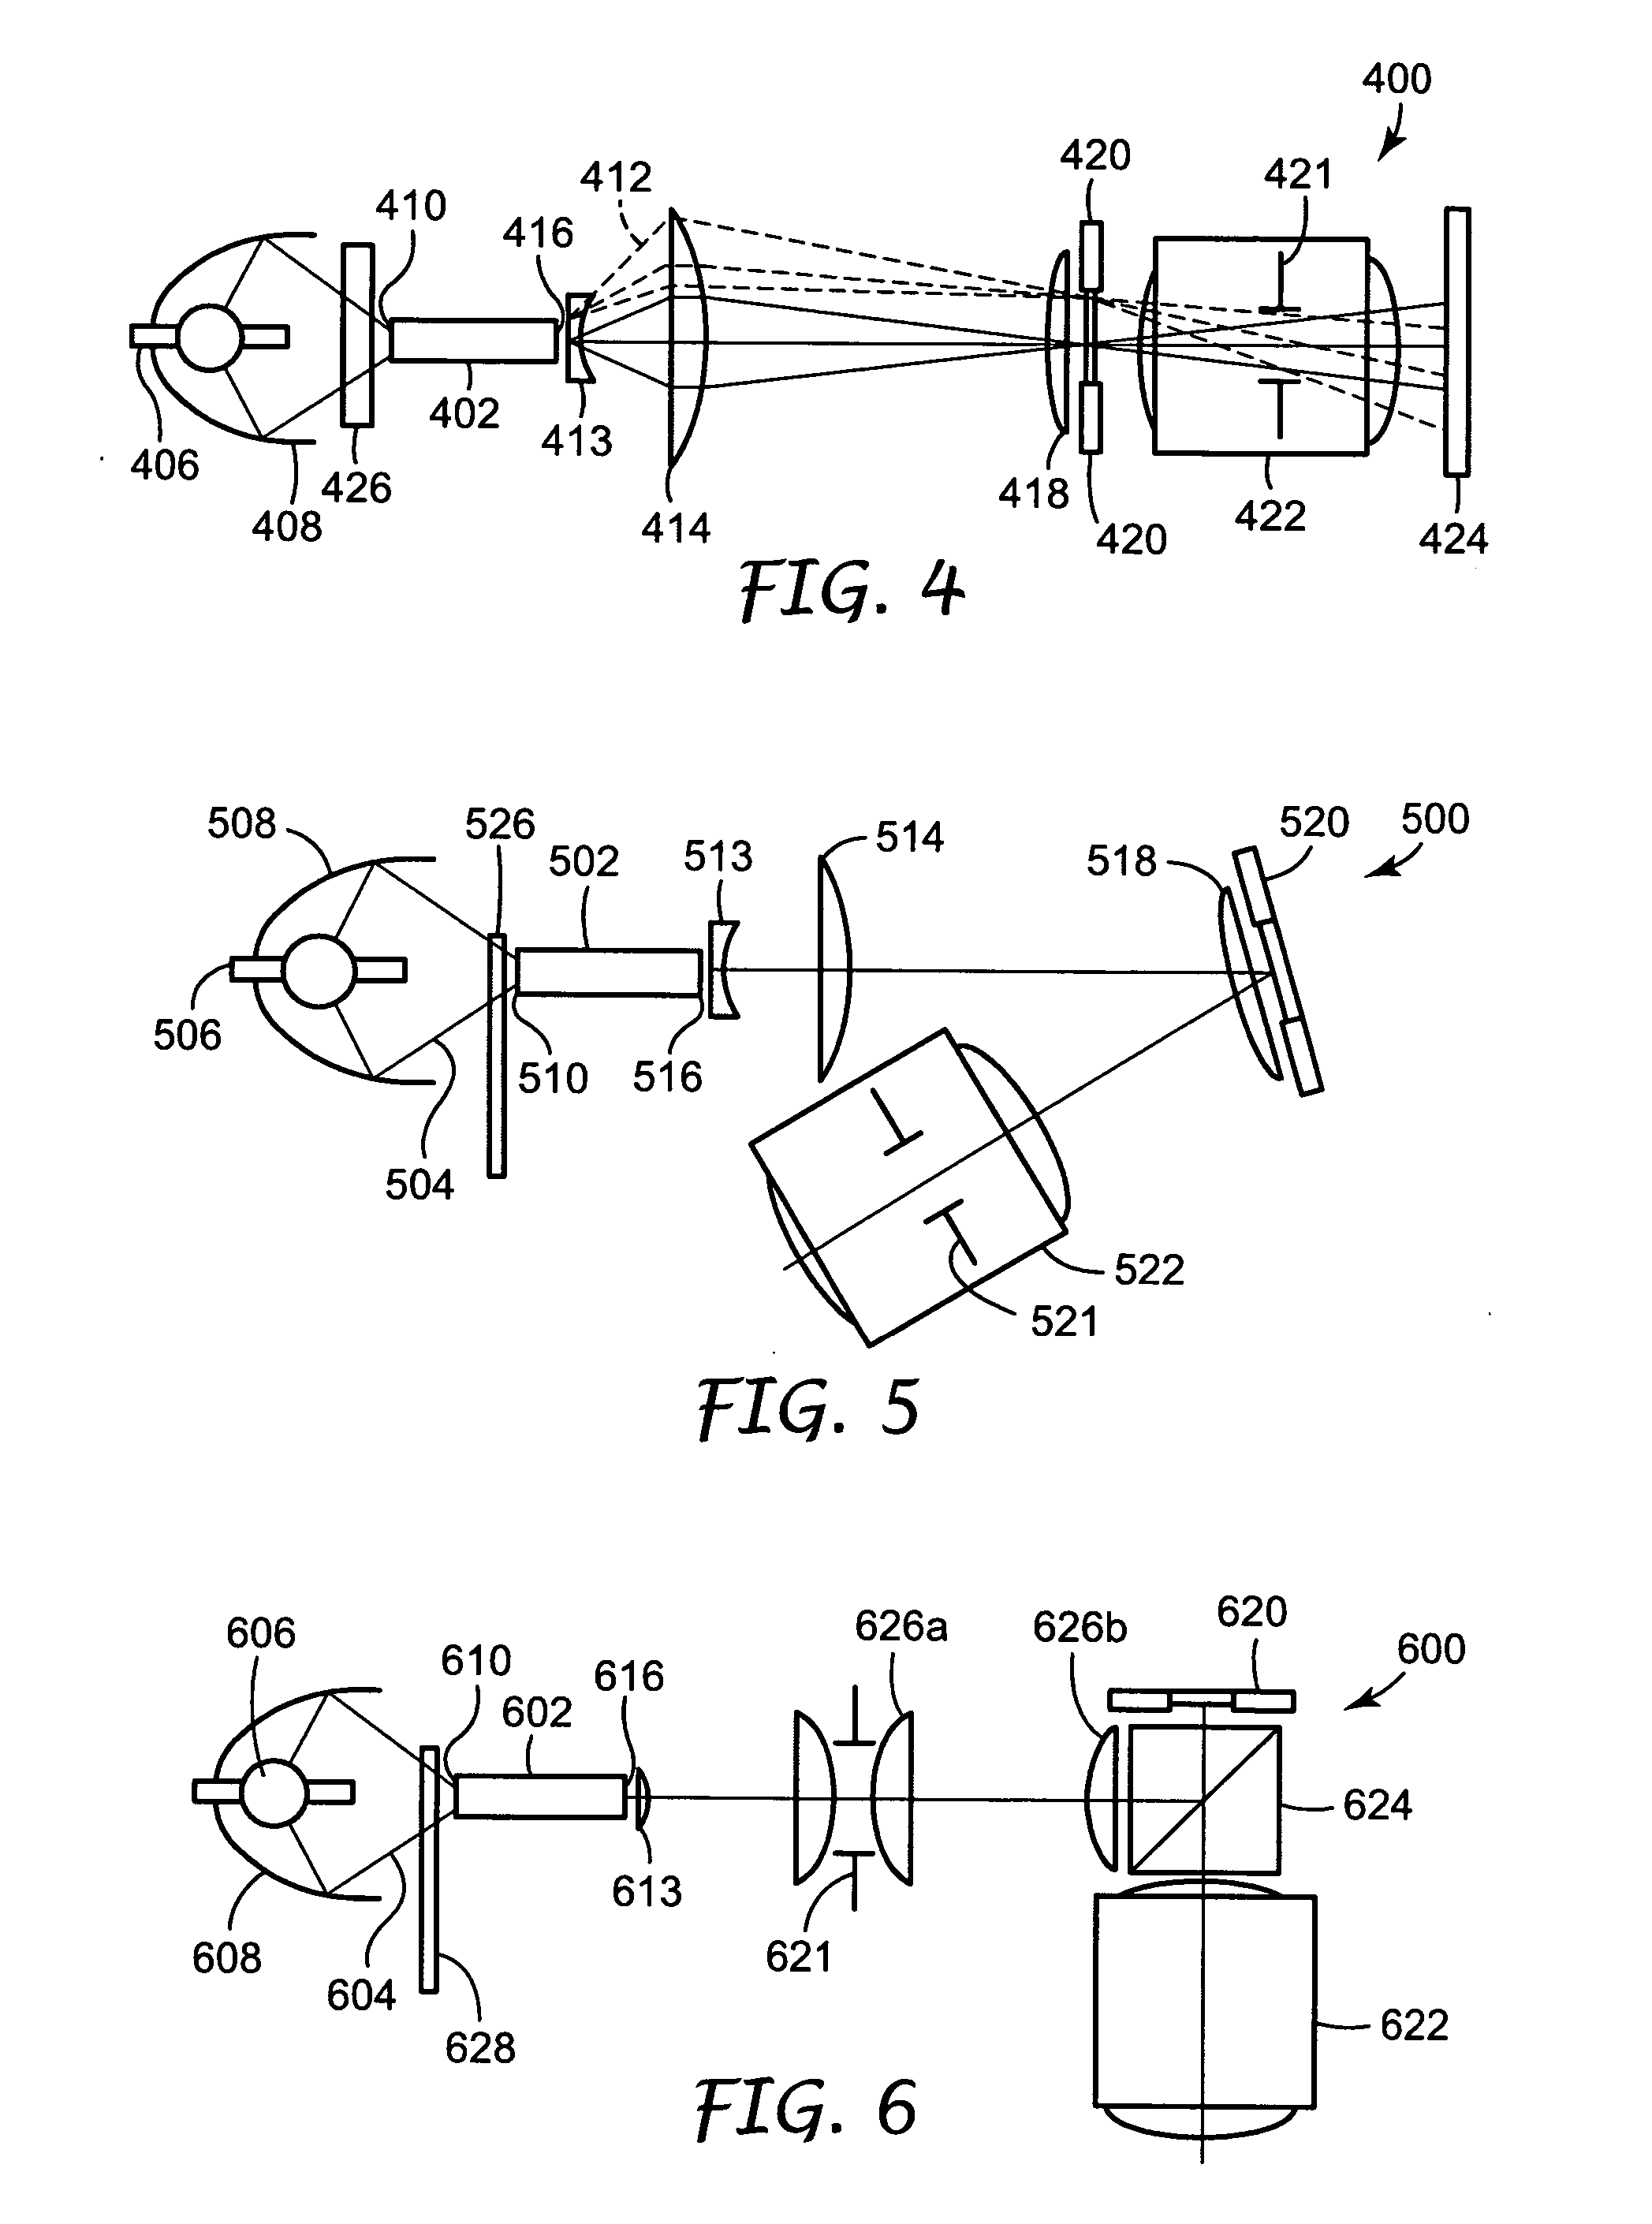 Projection illumination system with tunnel integrator and field lens